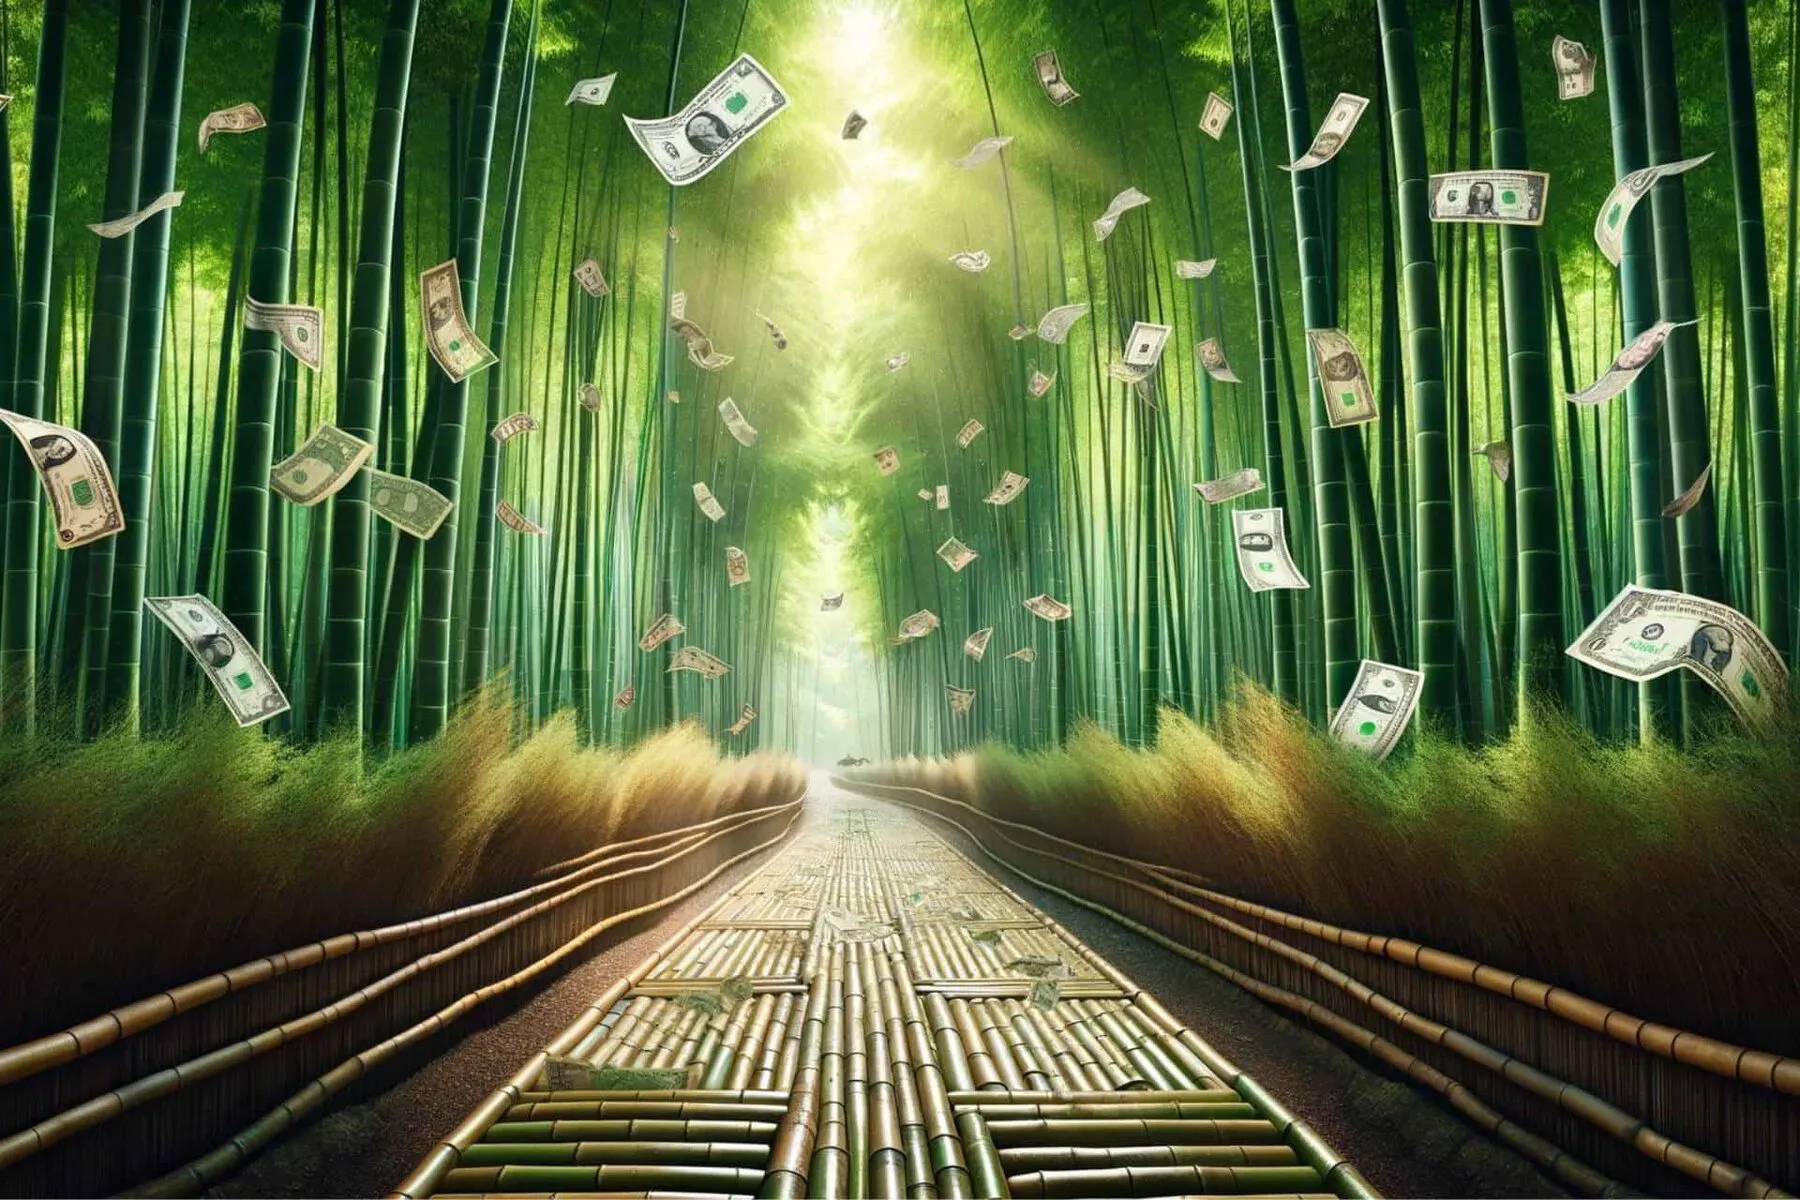 A surreal image featuring a dense bamboo forest with a path made of bamboo flooring raining dollars